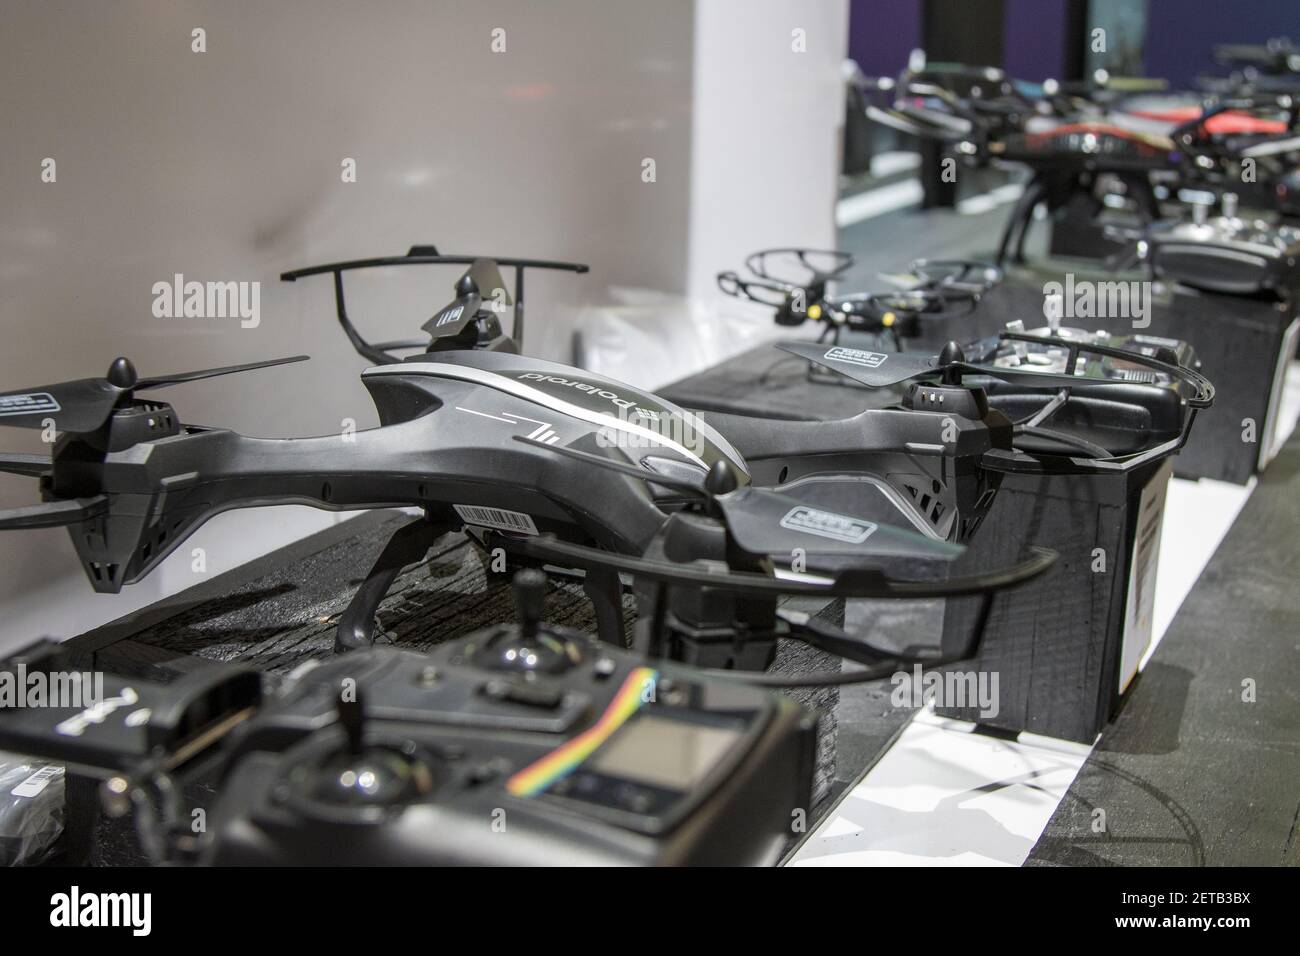 Polaroid Drone in the Polaroid Booth at the Consumer Electronics Show held  in Las Vegas, Nevada on January 5, 2016. (Photo by Mikey McNulty) ***  Please Use Credit from Credit Field *** Stock Photo - Alamy